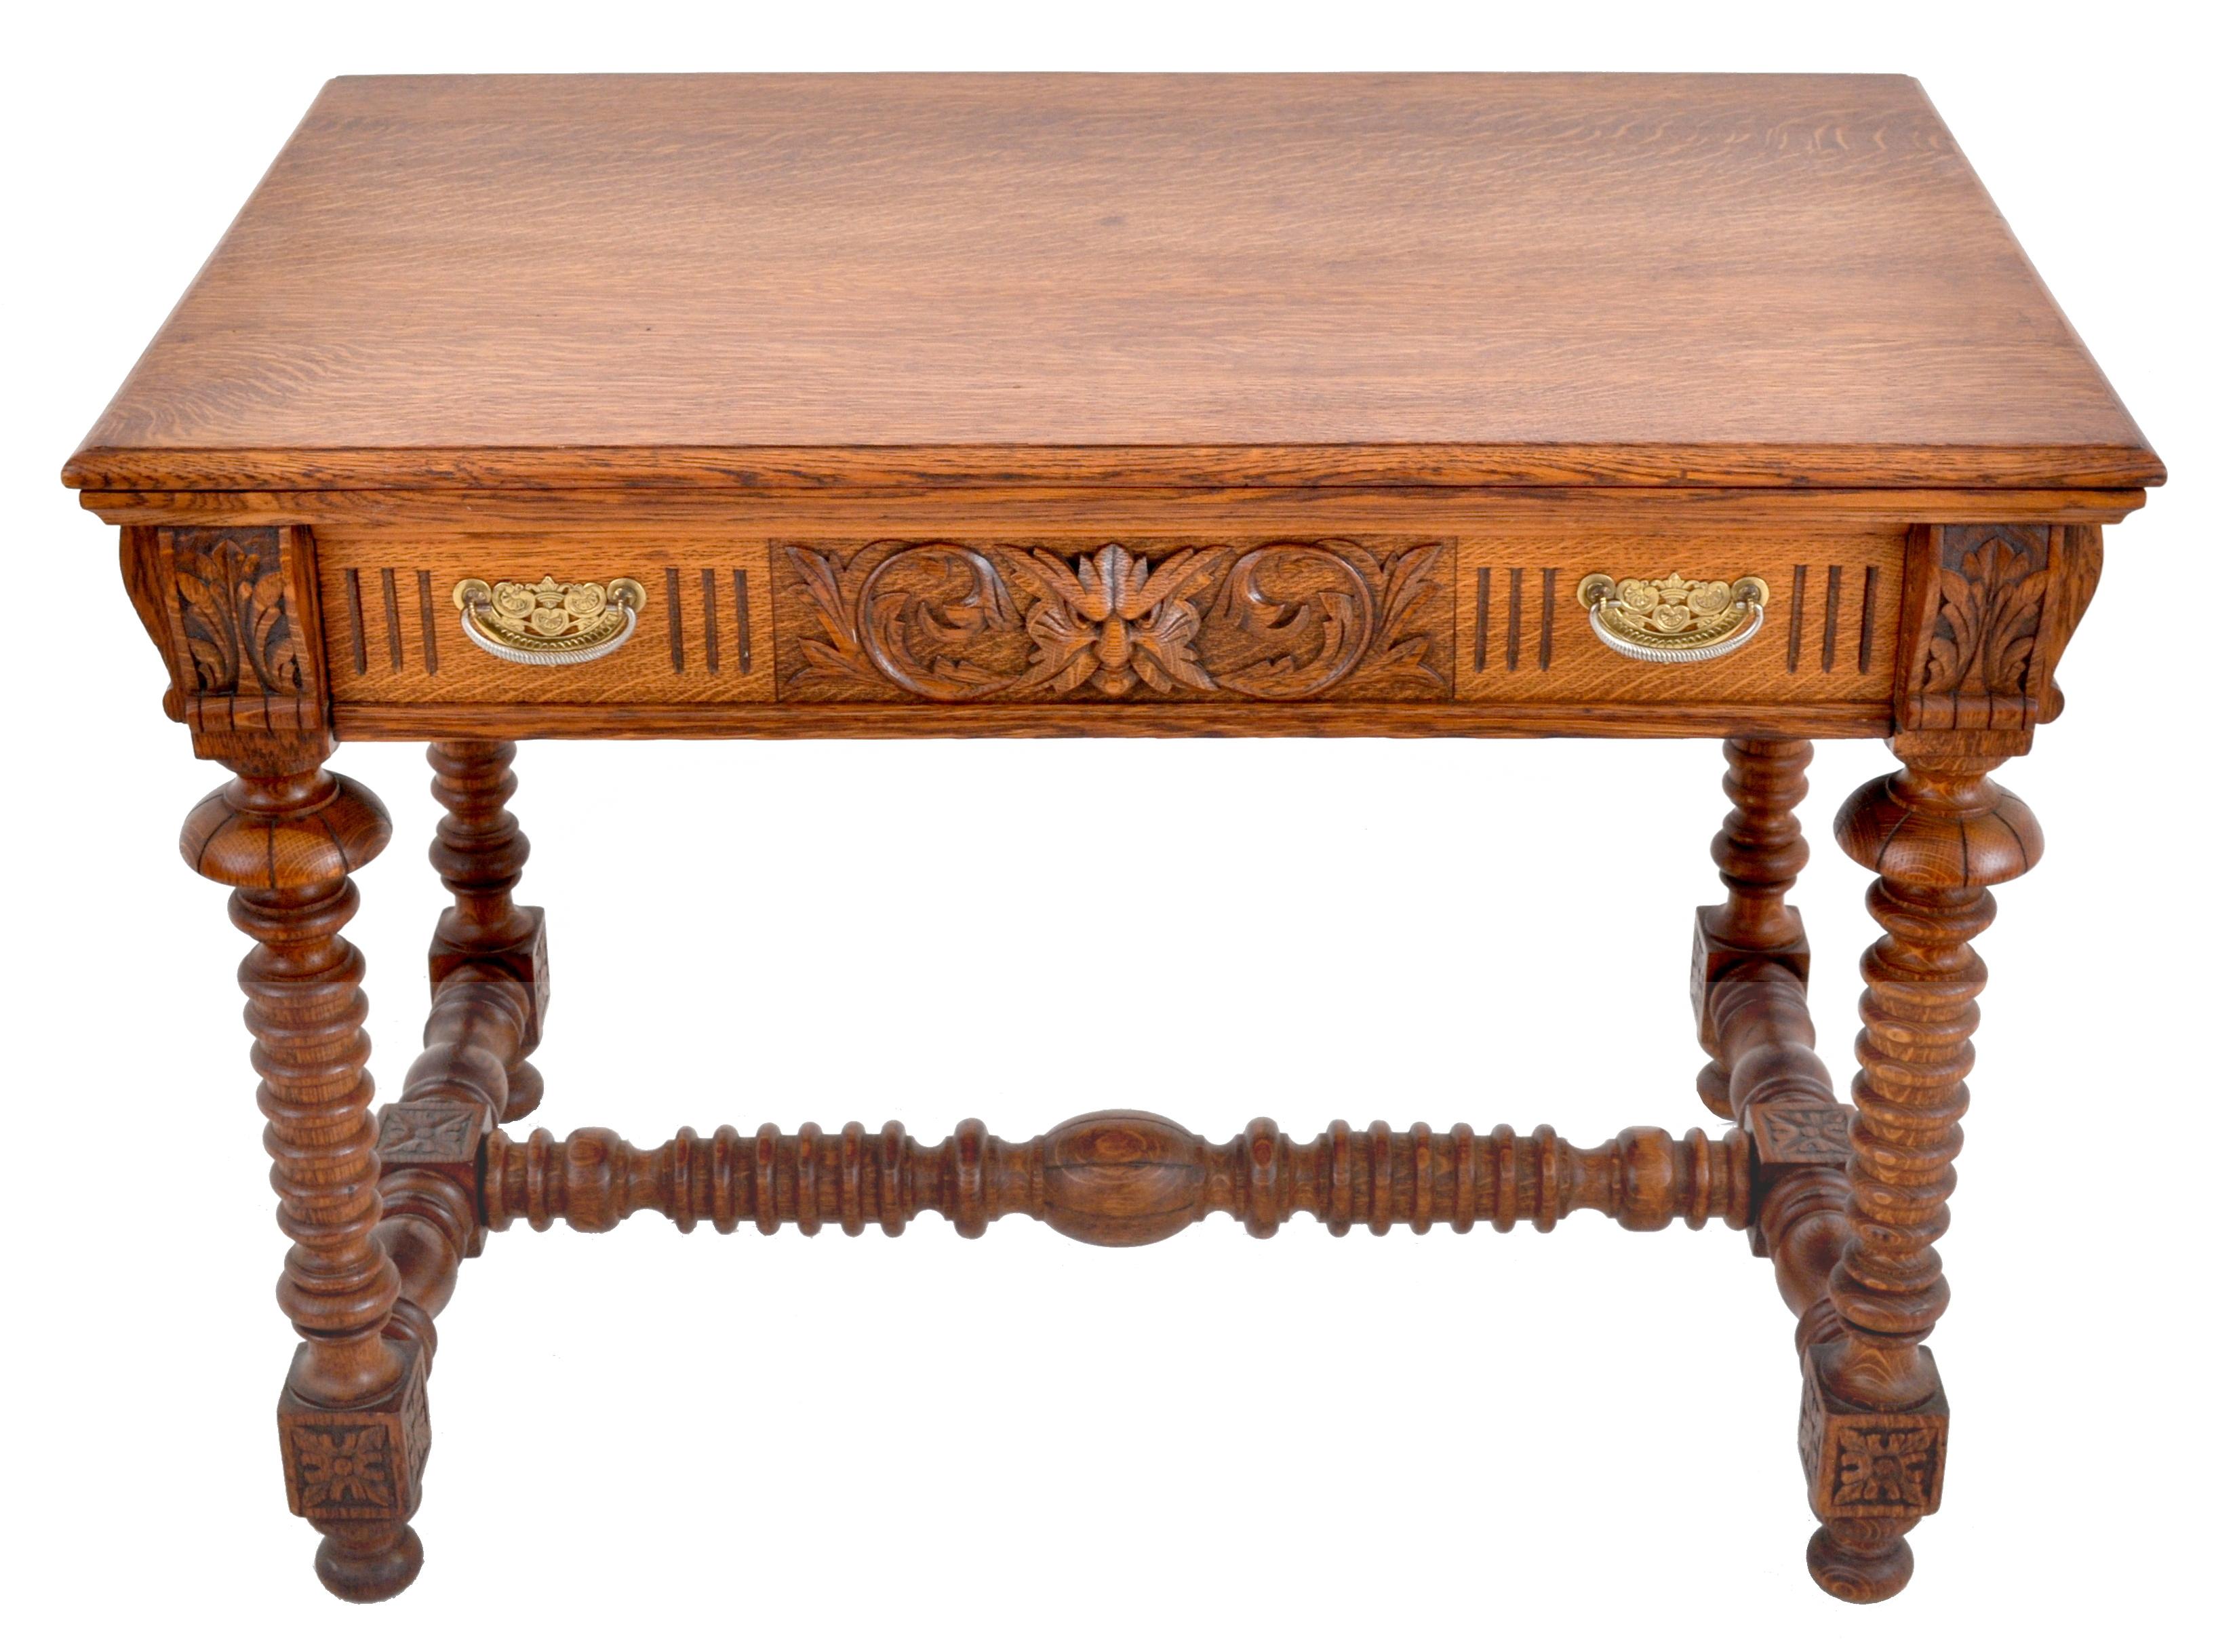 19th Century Antique American Arts & Crafts Carved Oak Library/Writing Table/Desk, circa 1890